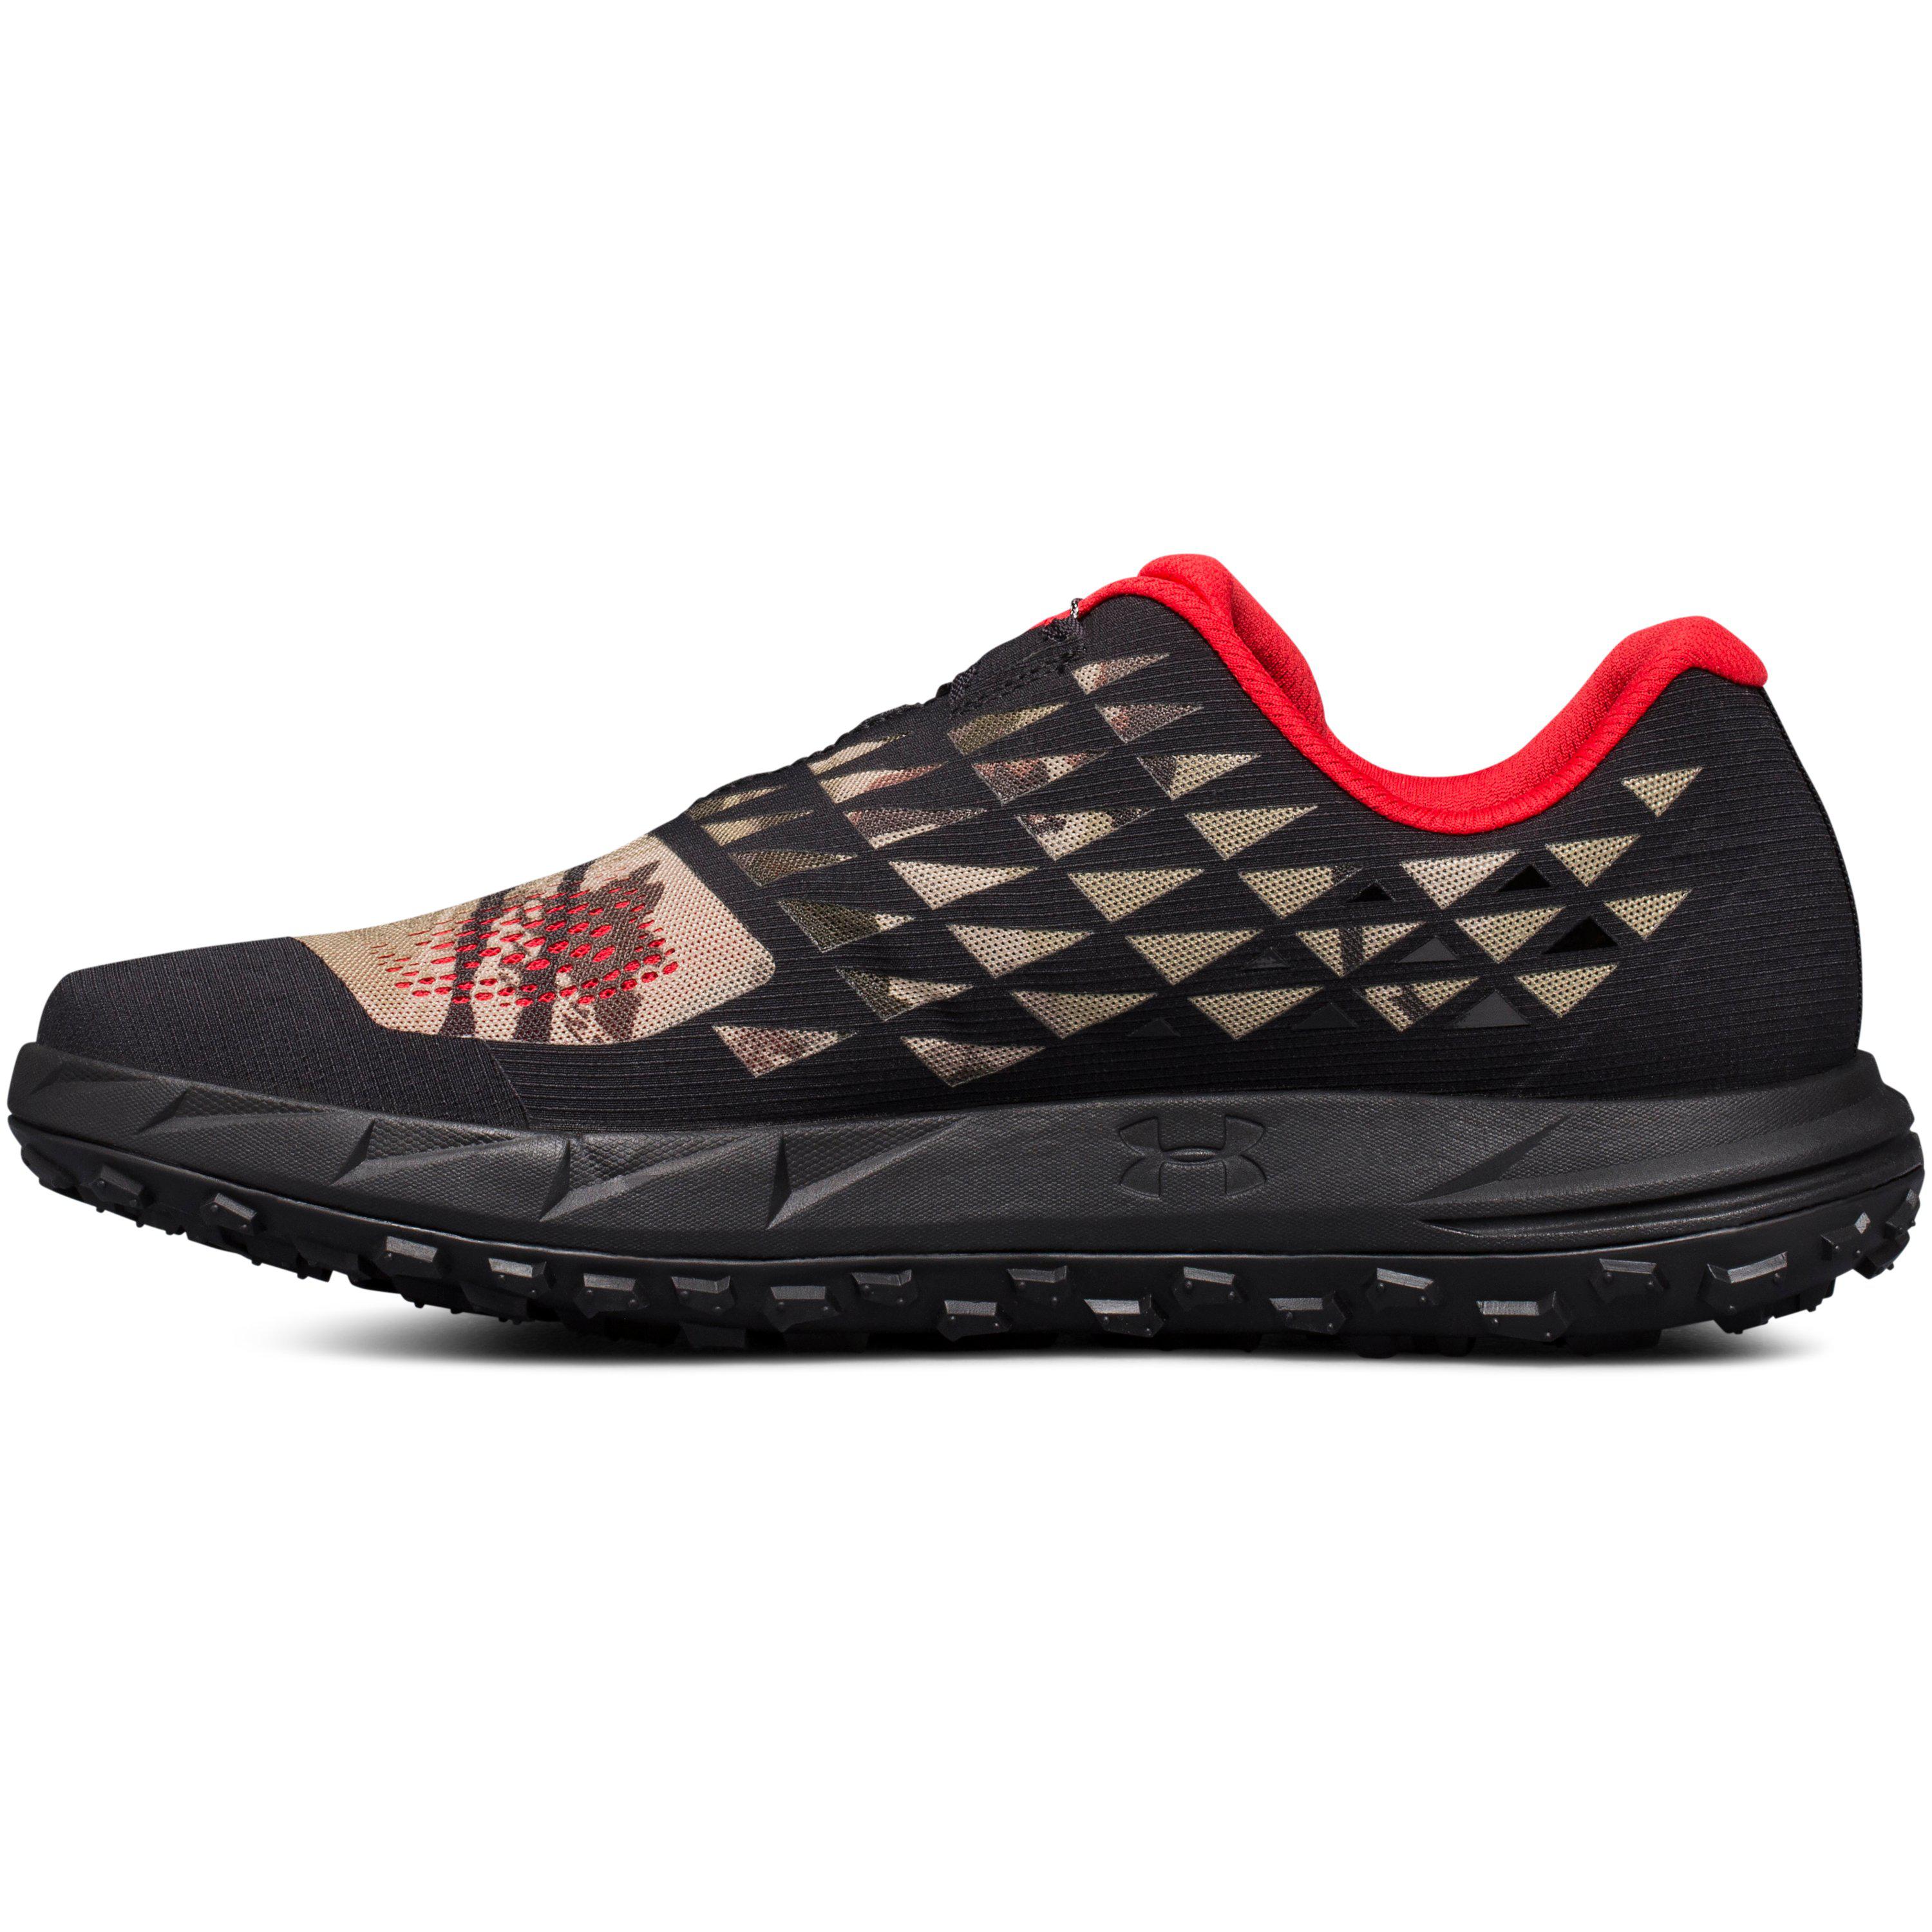 Total 77+ imagen under armour fat tire shoes - Abzlocal.mx